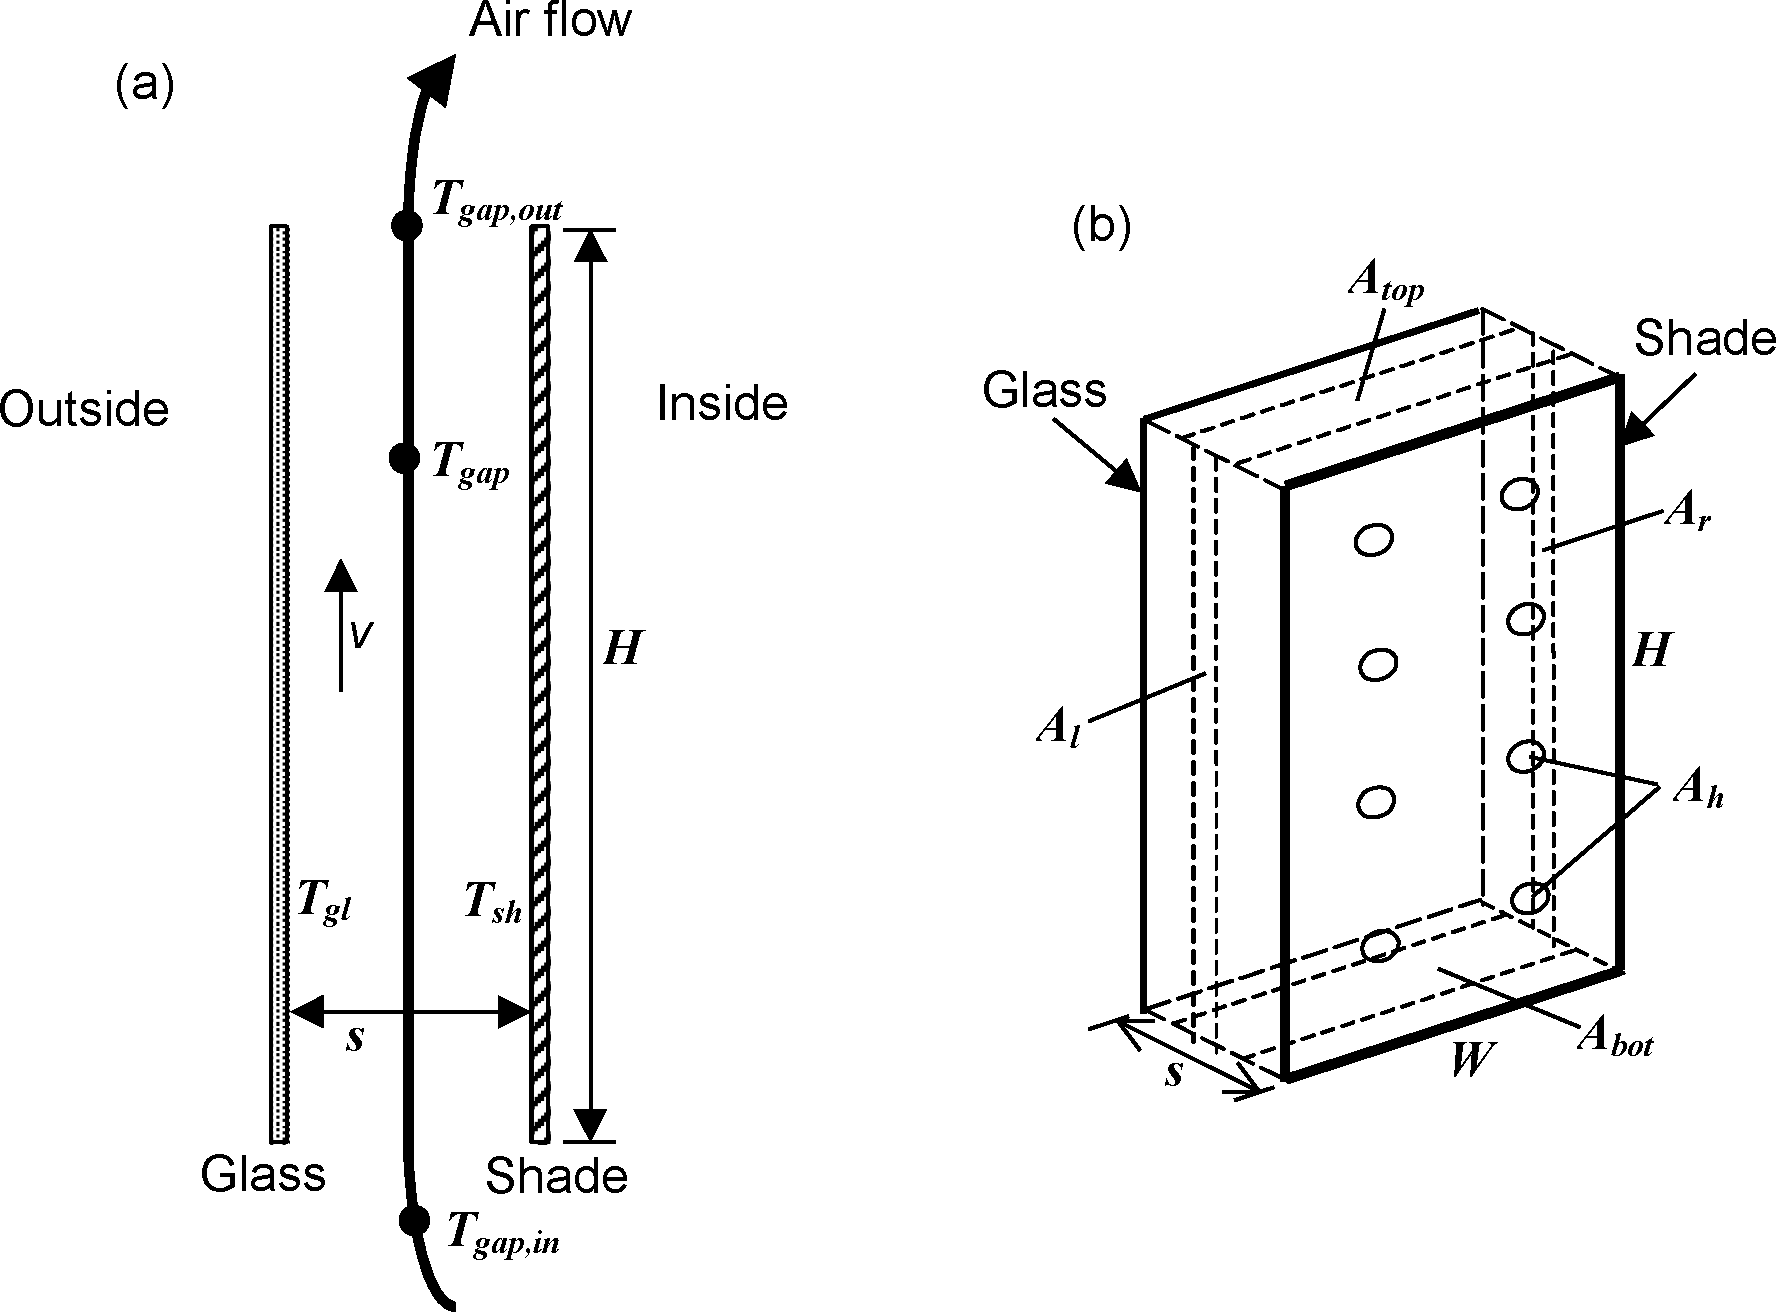 Vertical section (a) and perspective view (b) of glass layer and interior shading layer showing variables used in the gap airflow analysis. The opening areas A_{bot}, A_{top}, A_{l}, A_{r} and A_{h} are shown schematically. [fig:vertical-section-a-and-perspective-view-b-of]